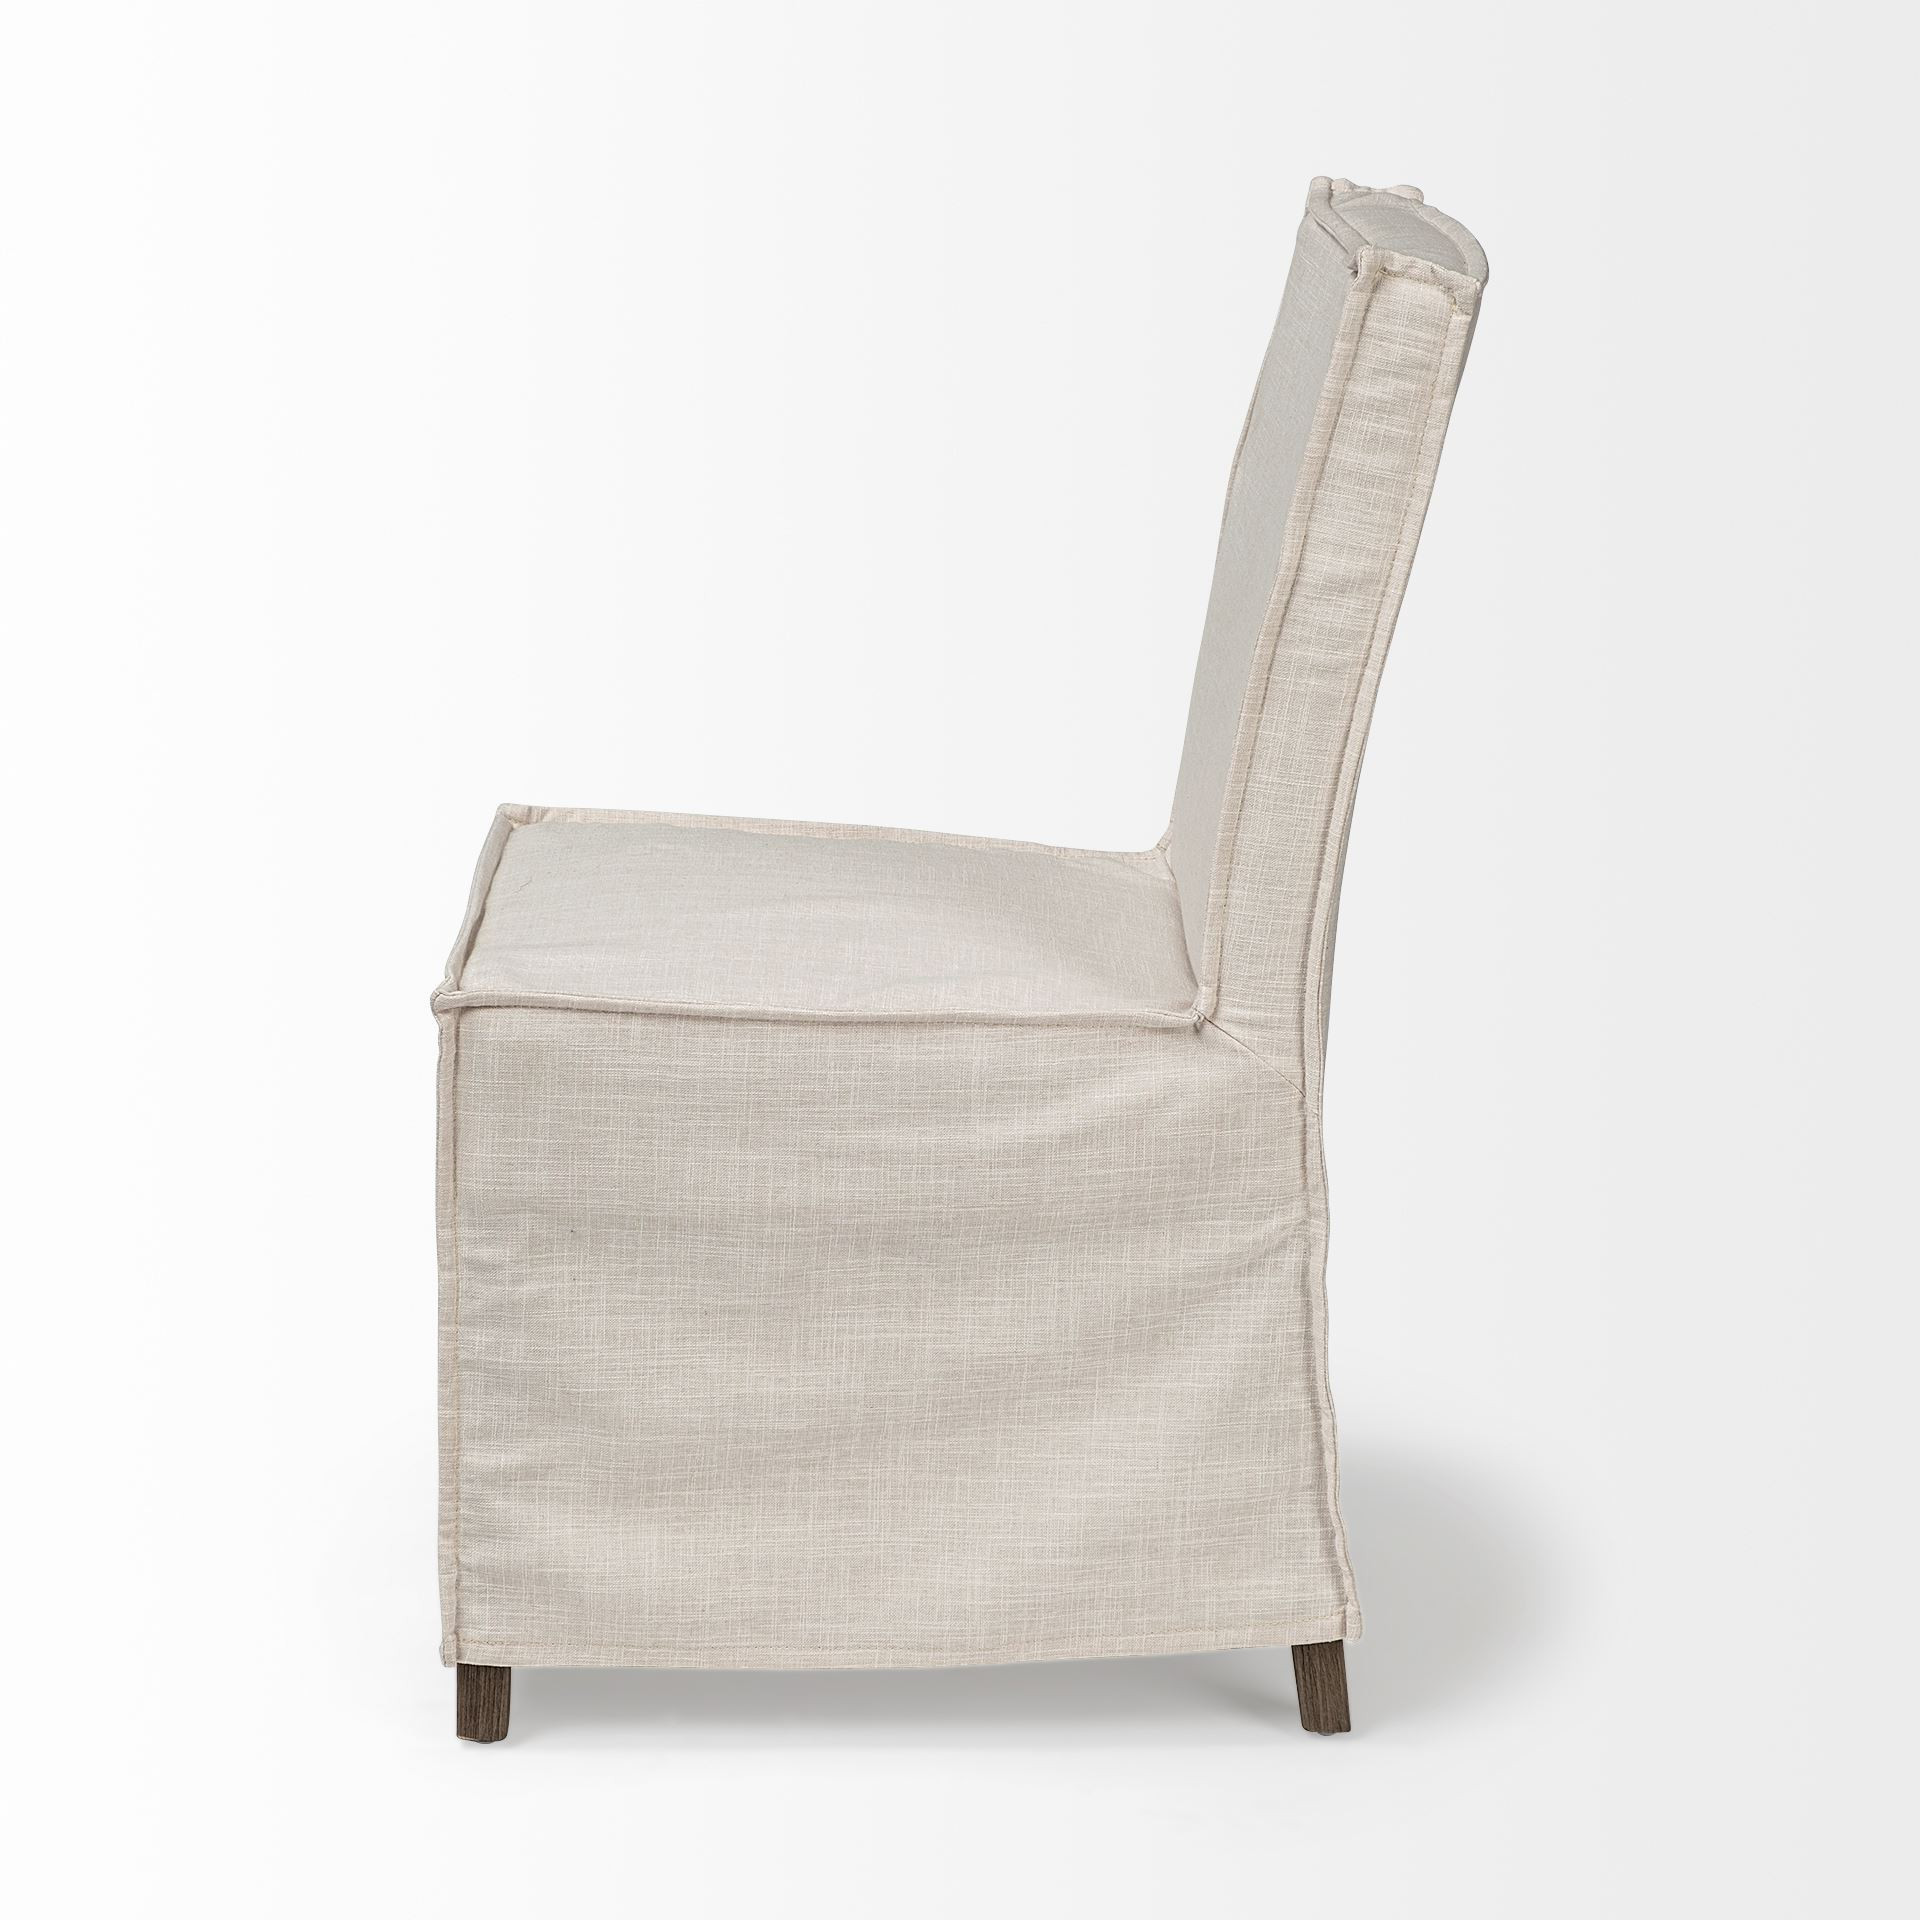 Cream Fabric Slip Cover with Brown Wooden Base Dining Chair